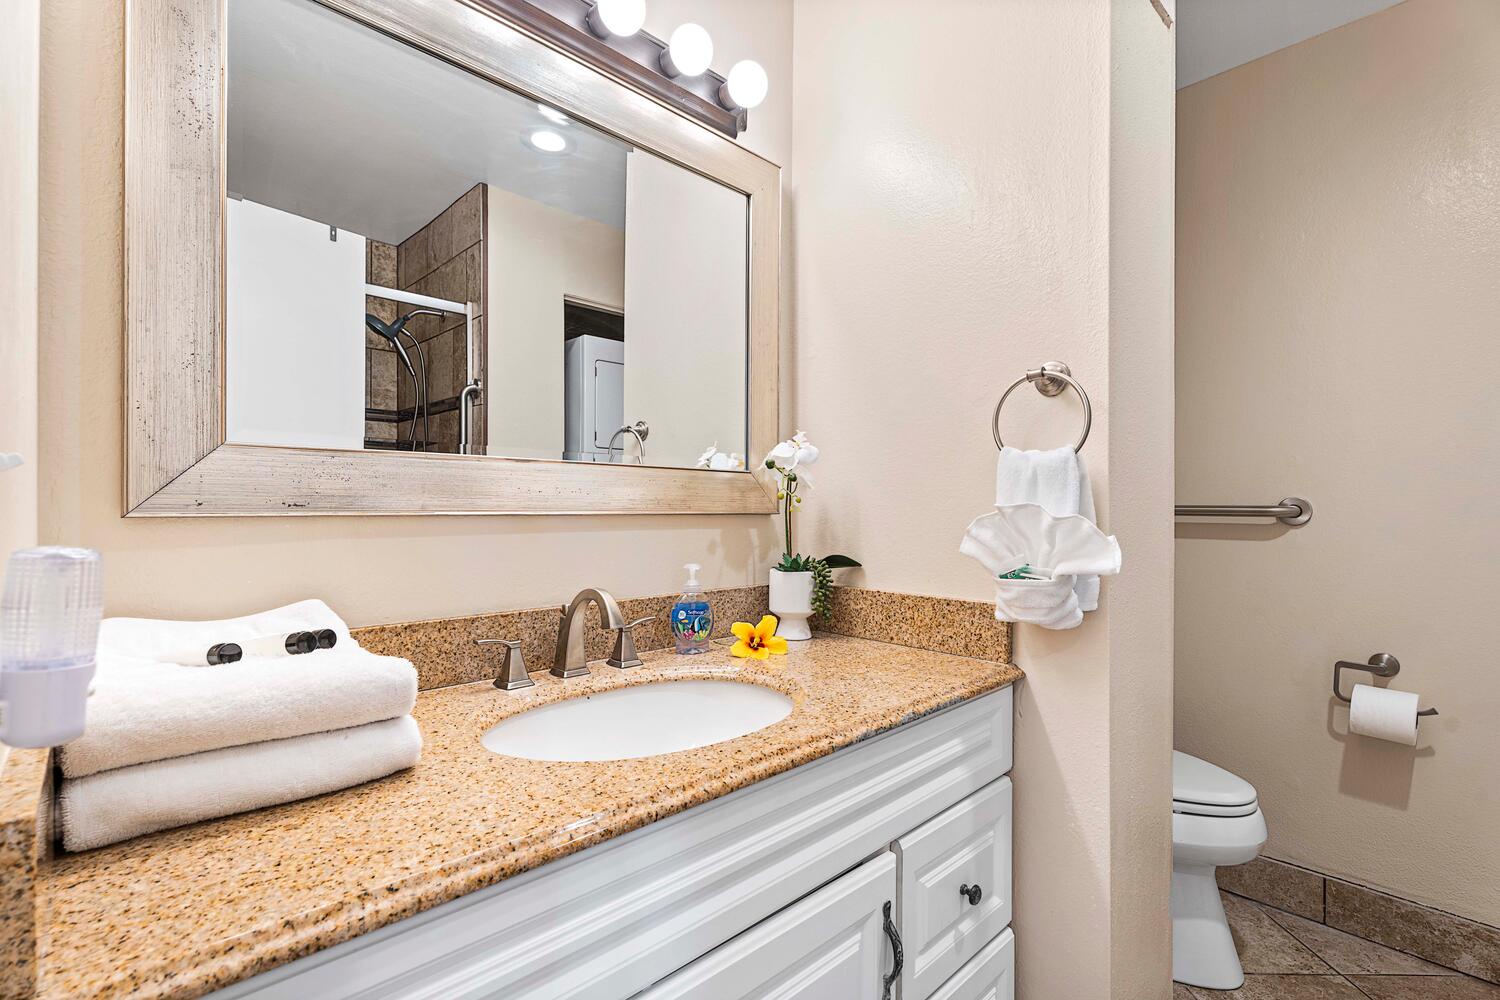 Kailua Kona Vacation Rentals, Keauhou Kona Surf & Racquet 1104 - Clean and modern ensuite bathroom featuring a stylish single sink — a private oasis for freshening up.